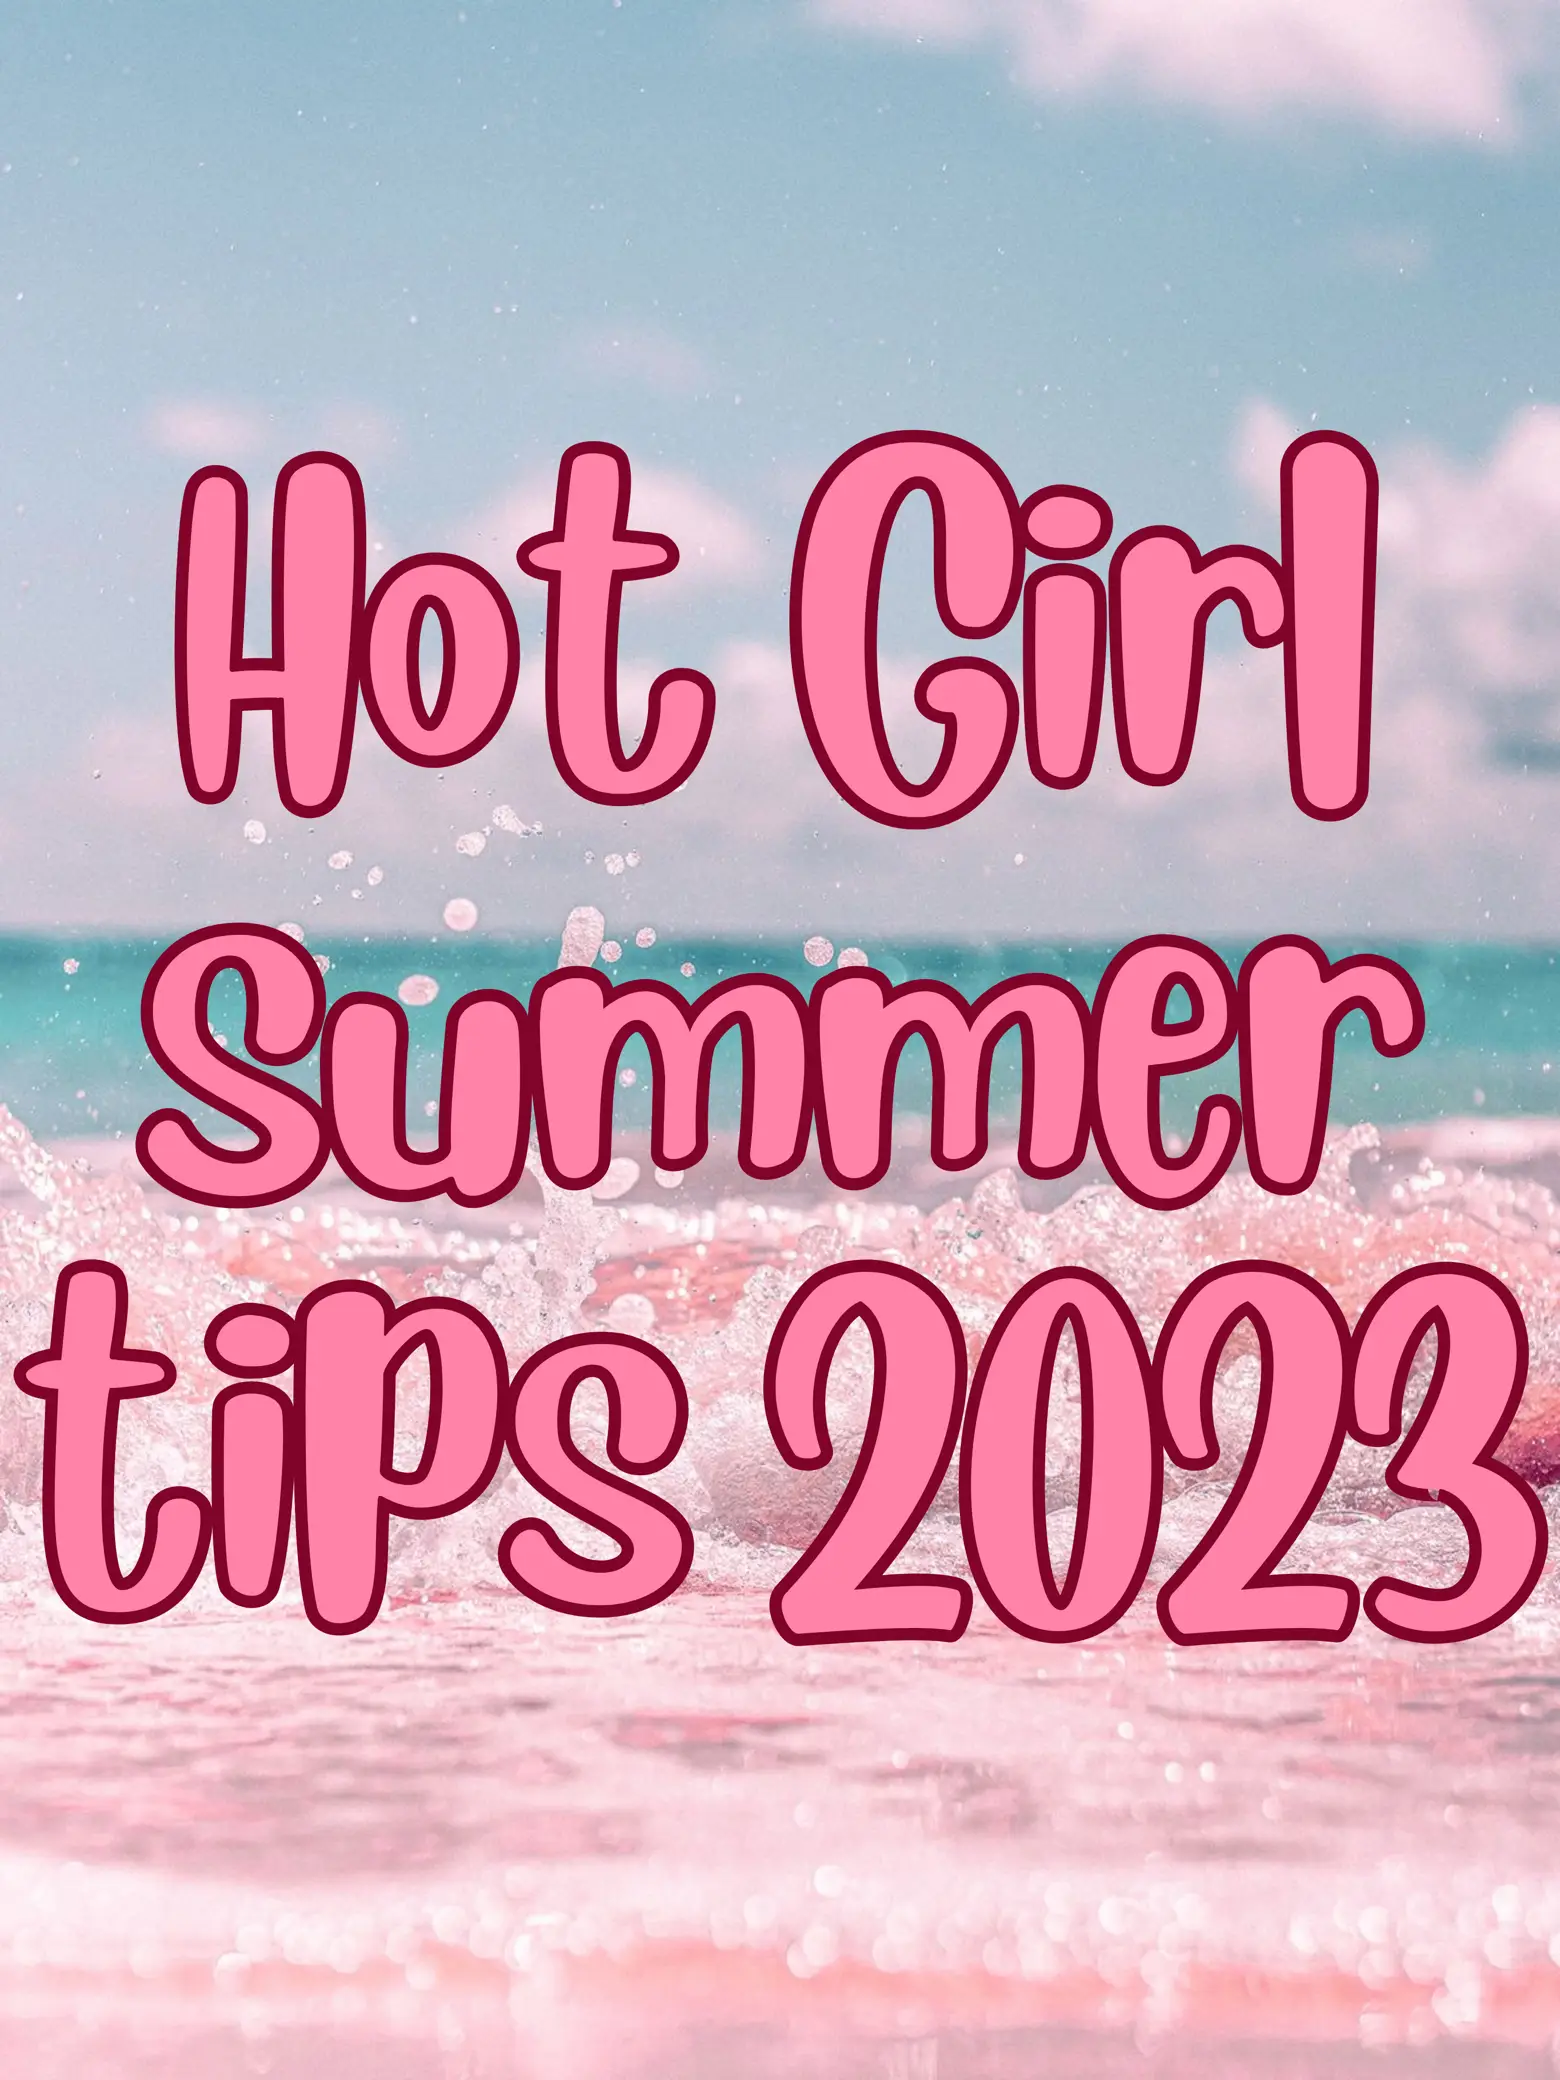 Your guide to a hot girl summer glow up